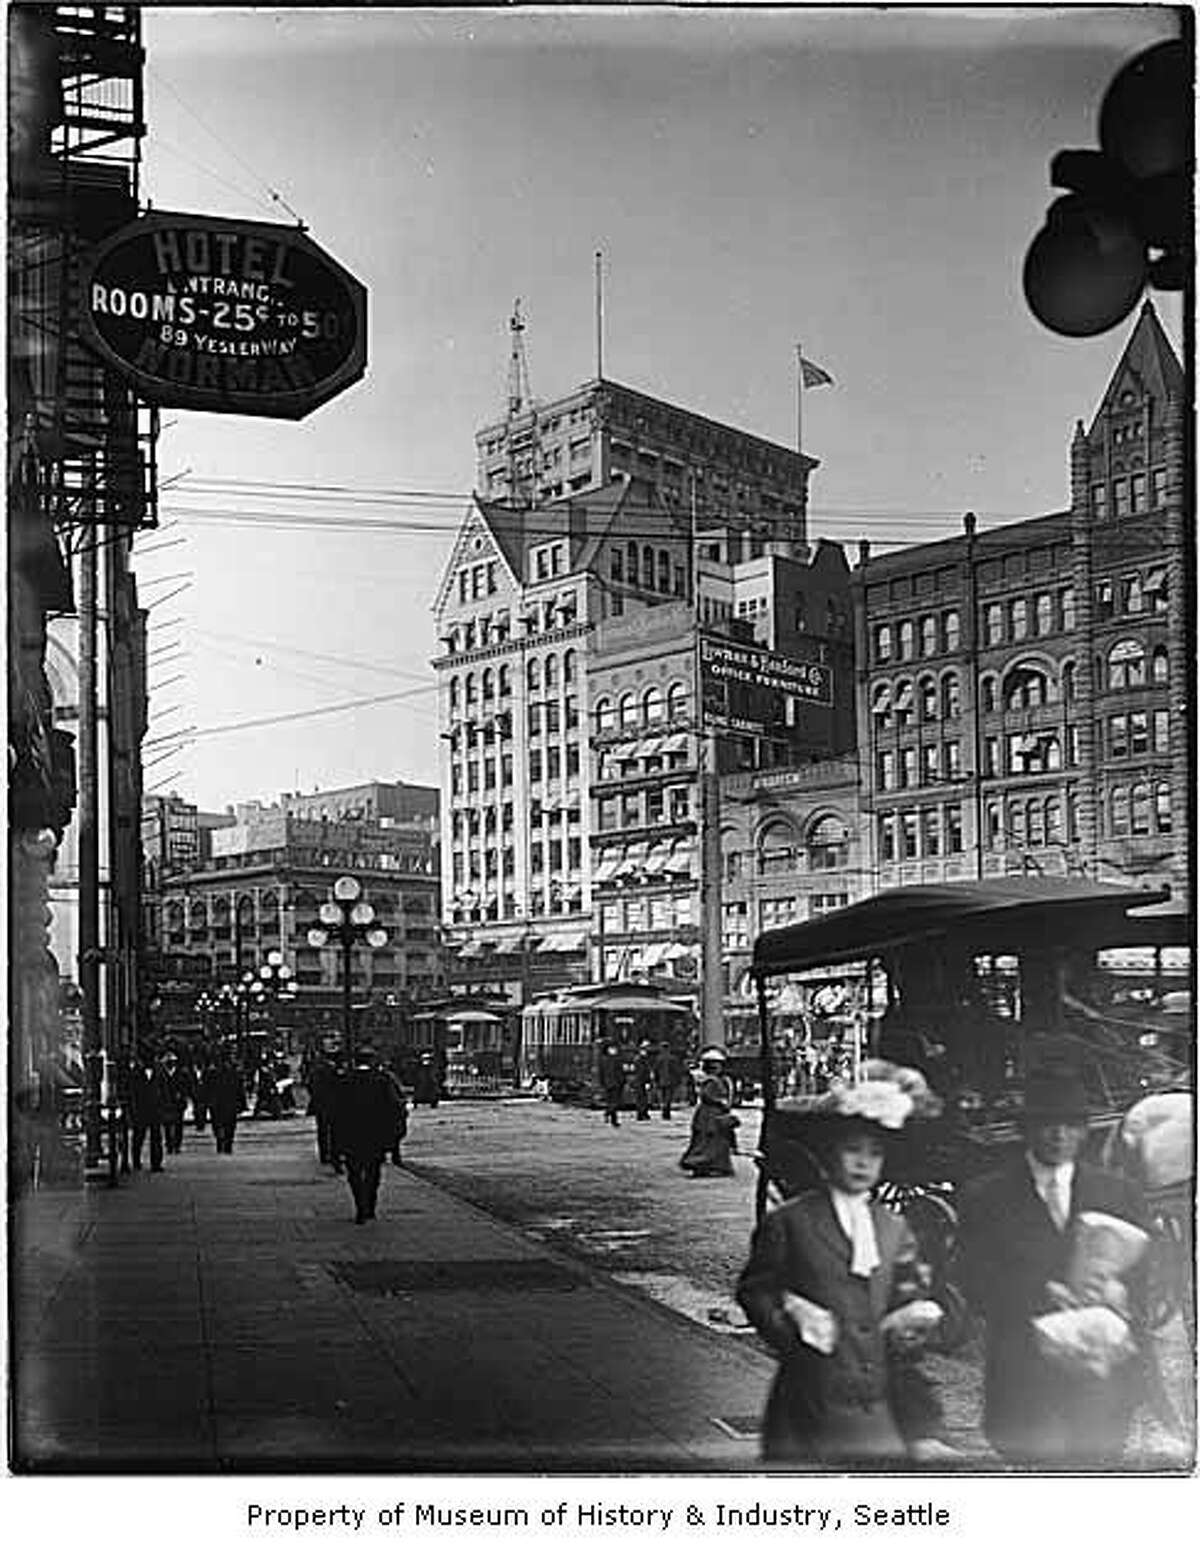 Skyscrapers and towers of Seattle's yesteryear